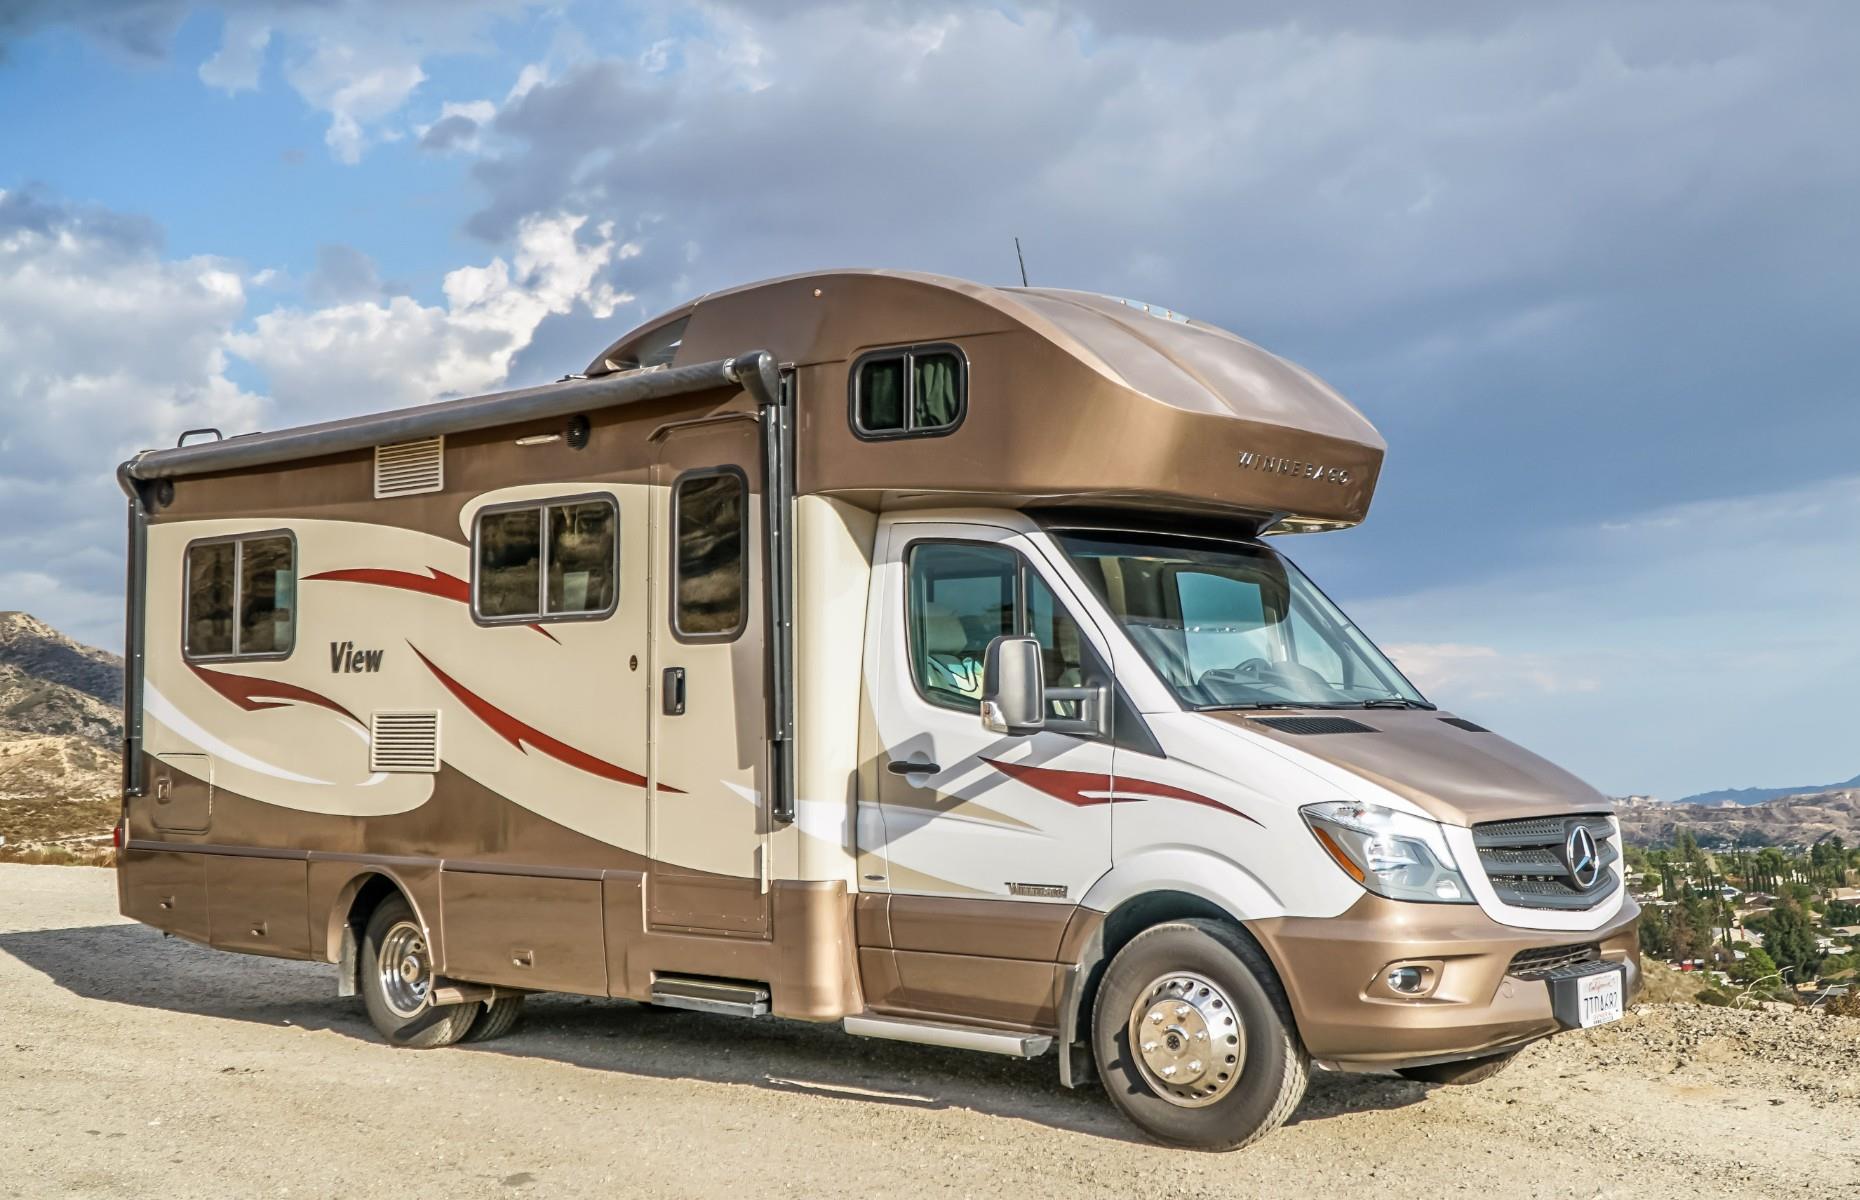 <p>Packed with all the road trip essentials and more, this RV is designed to ensure a safe, comfortable and stress-free ride. Measuring 25-feet-long (8m) and eight-feet-wide (2m), the Mercedes Winnebago Model V can sleep up to five passengers. It also comes equipped with an iPad filled with instructional videos and training on how to operate the RV, making it an ideal choice for first-timers. Find out <a href="https://www.loveexploring.com/galleries/77699/rv-heaven-the-best-place-to-stay-in-every-state-with-your-motorhome">the best RV park to stay in every state</a>.</p>